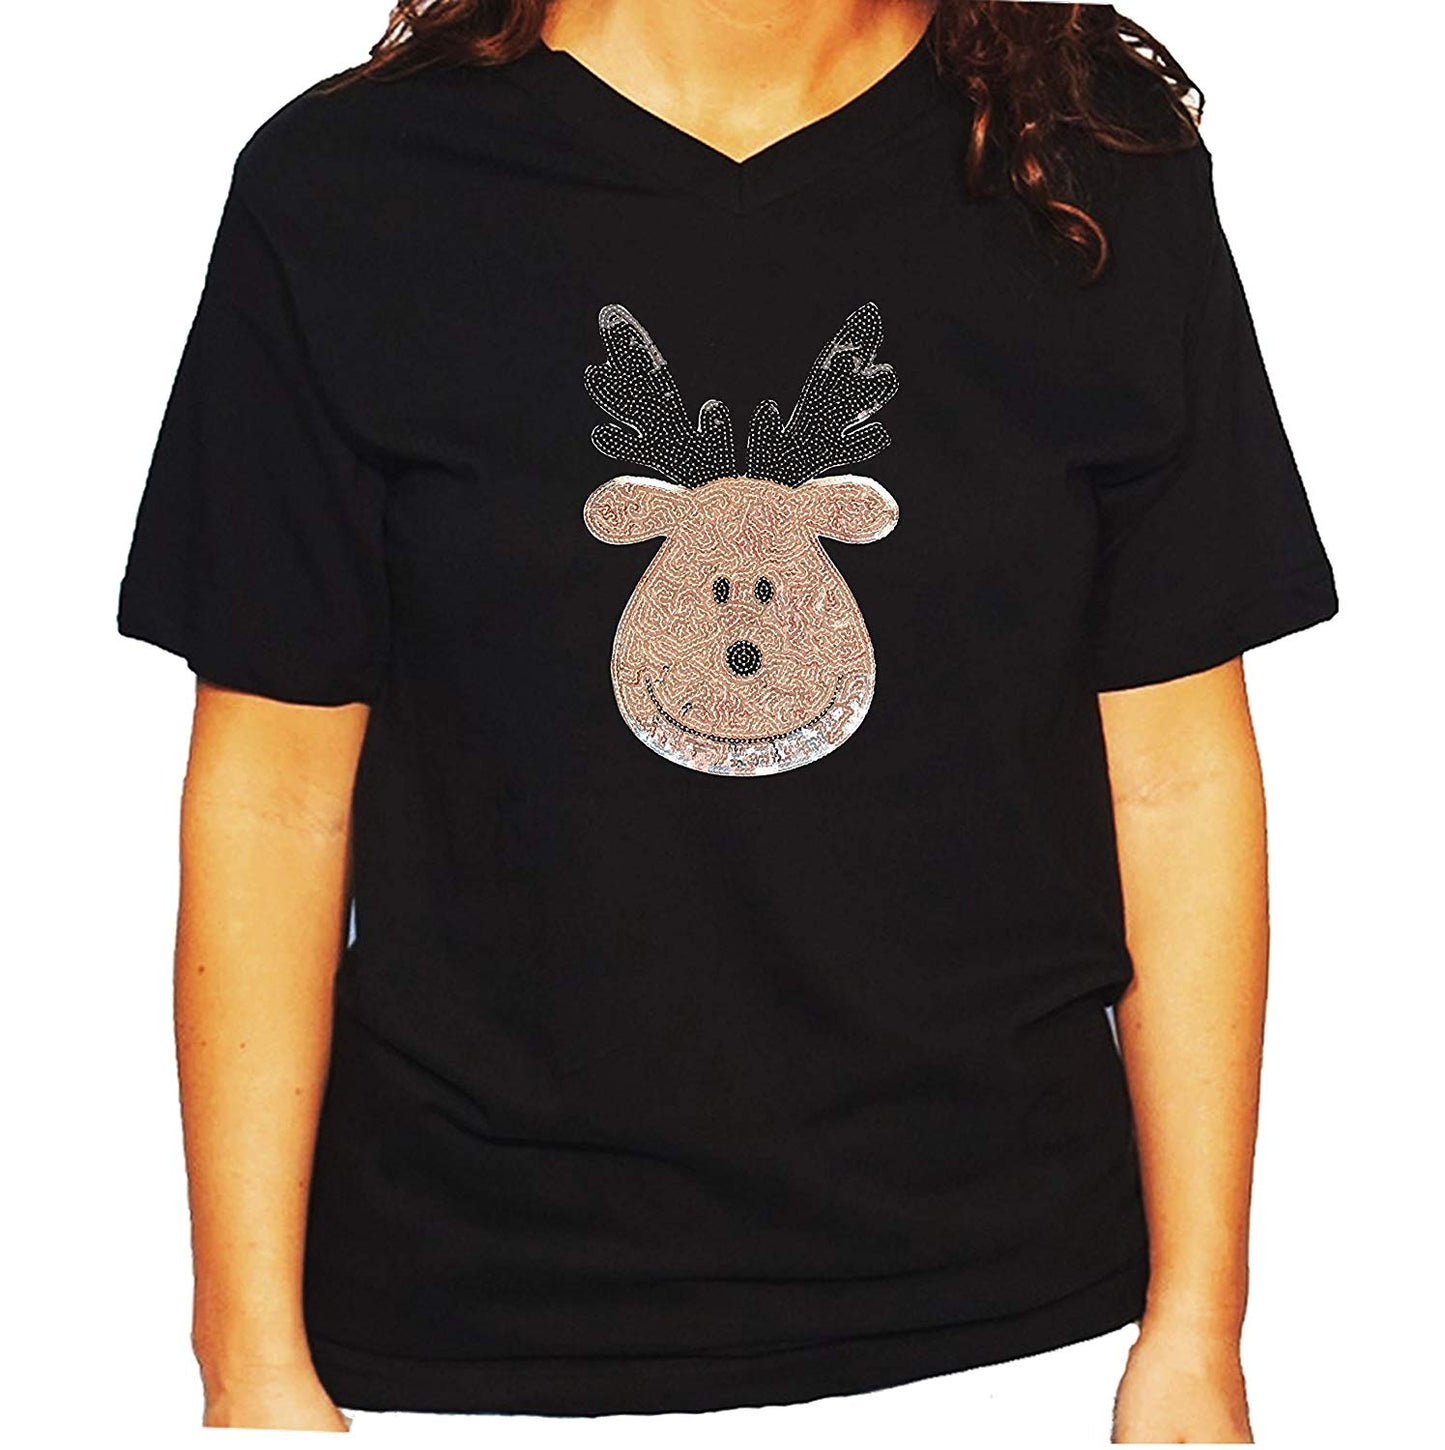 Women's / Unisex T-Shirt with Cute Silver Reindeer In Sequence